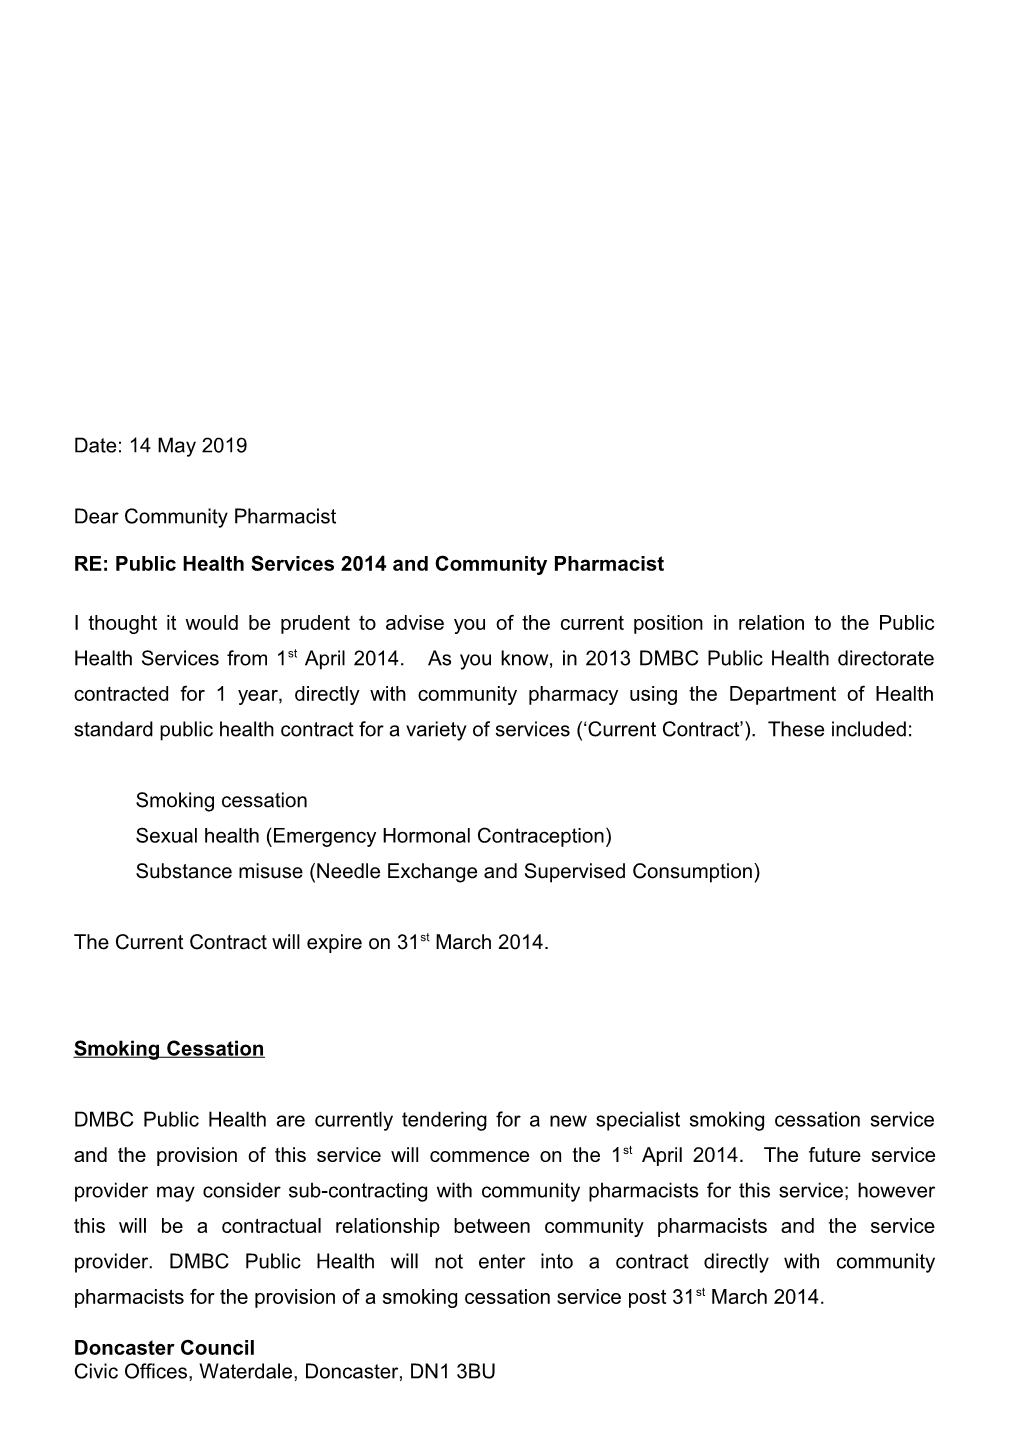 RE: Public Health Services 2014 and Community Pharmacist